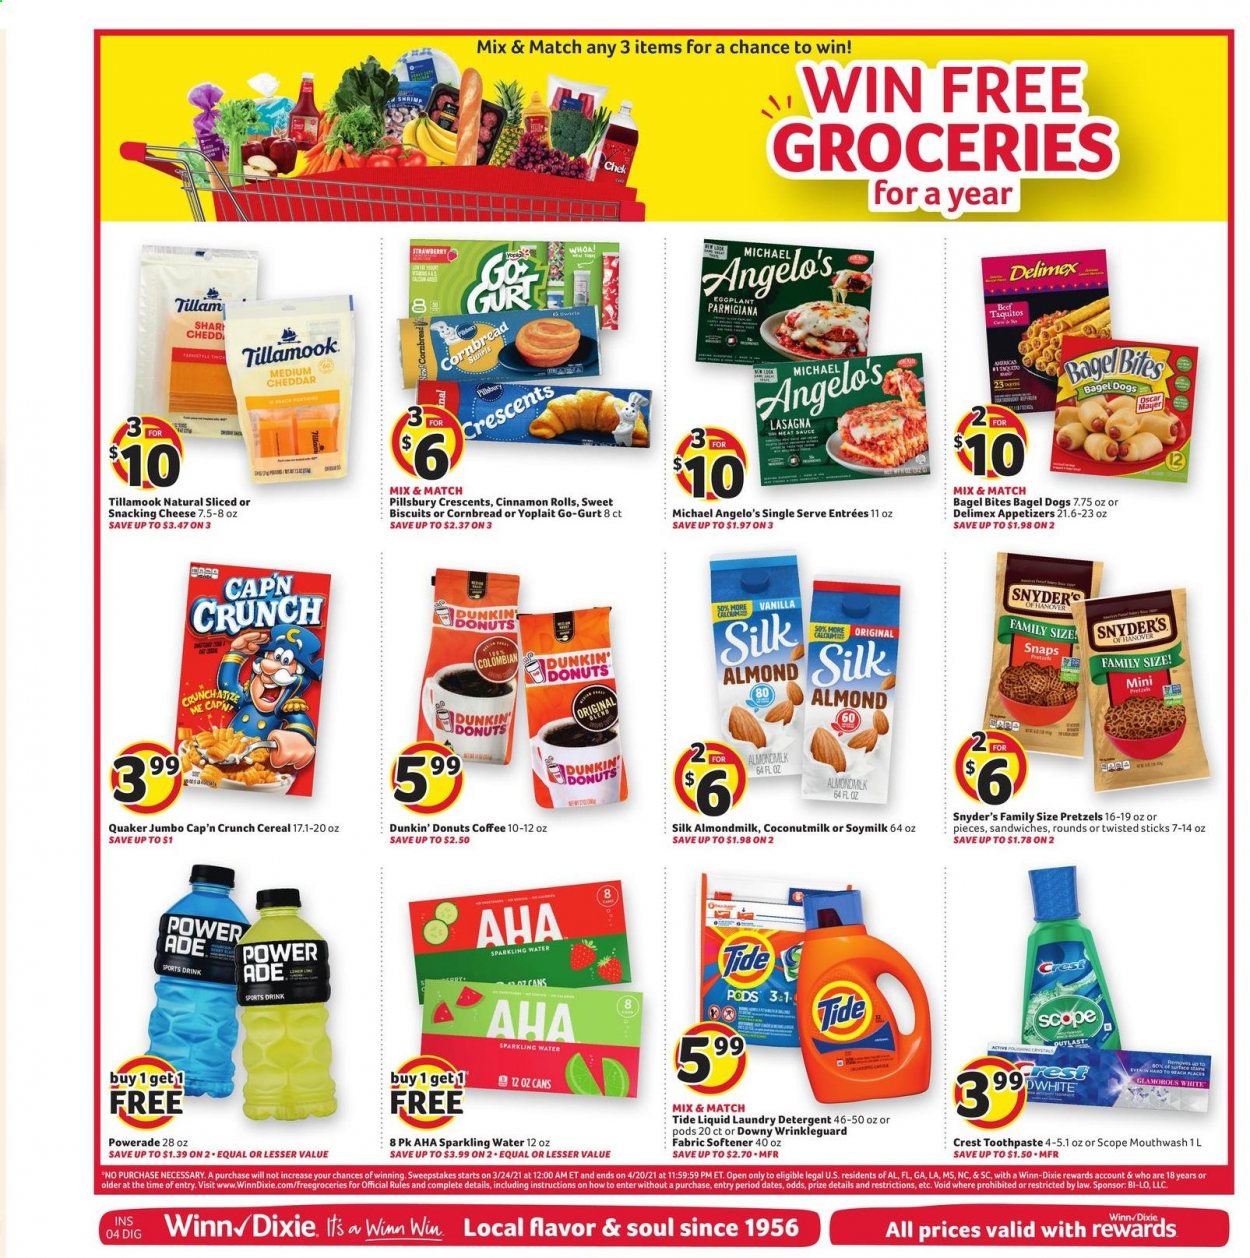 thumbnail - Winn Dixie Flyer - 03/31/2021 - 04/06/2021 - Sales products - pretzels, corn bread, cinnamon roll, donut, Dunkin' Donuts, Pillsbury, Quaker, lasagna meal, bagel dogs, taquitos, Oscar Mayer, cheddar, cheese, Yoplait, almond milk, soy milk, eggplant, biscuit, coconut milk, cereals, Cap'n Crunch, dried dates, Powerade, sparkling water, coffee, detergent, Tide, fabric softener, laundry detergent, toothpaste, mouthwash, Crest, pen, calcium. Page 15.